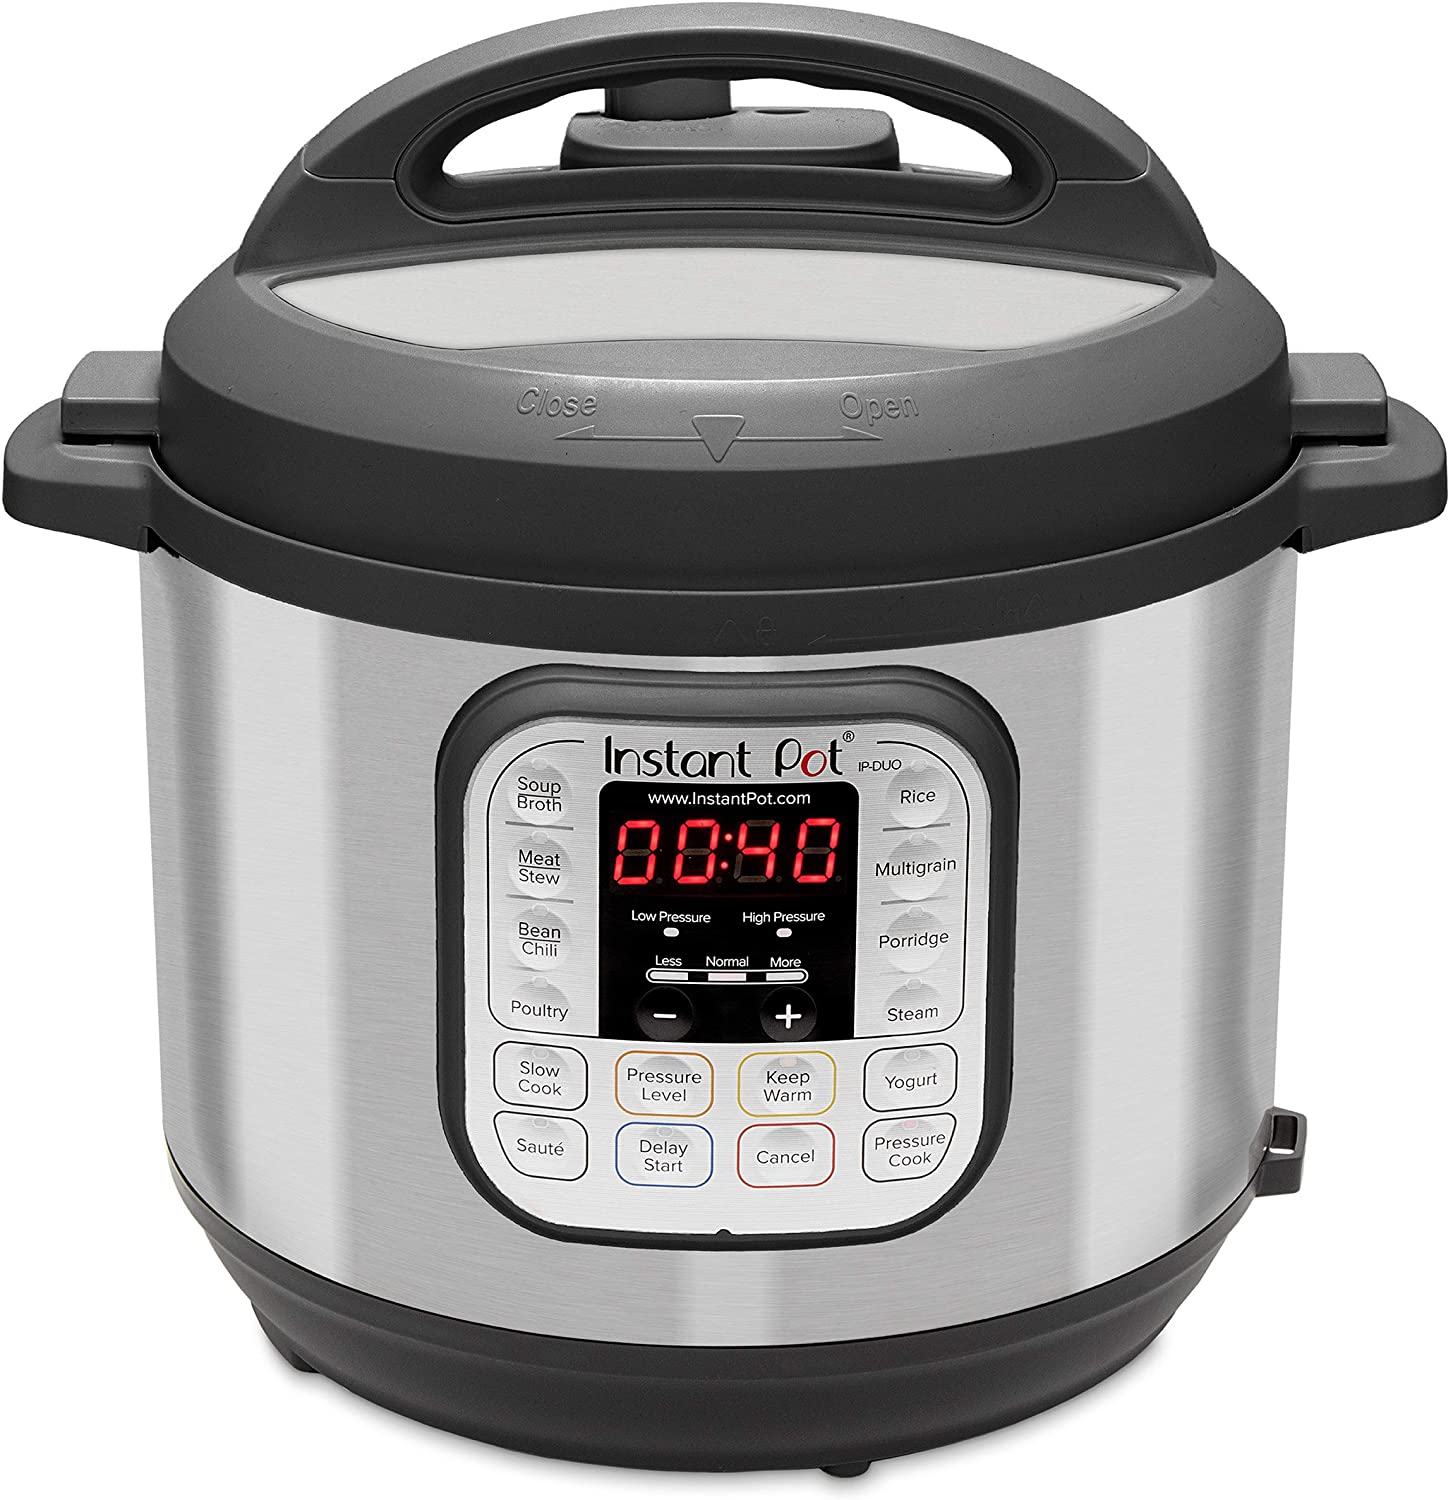 How to use Delay Start on Instant Pot 